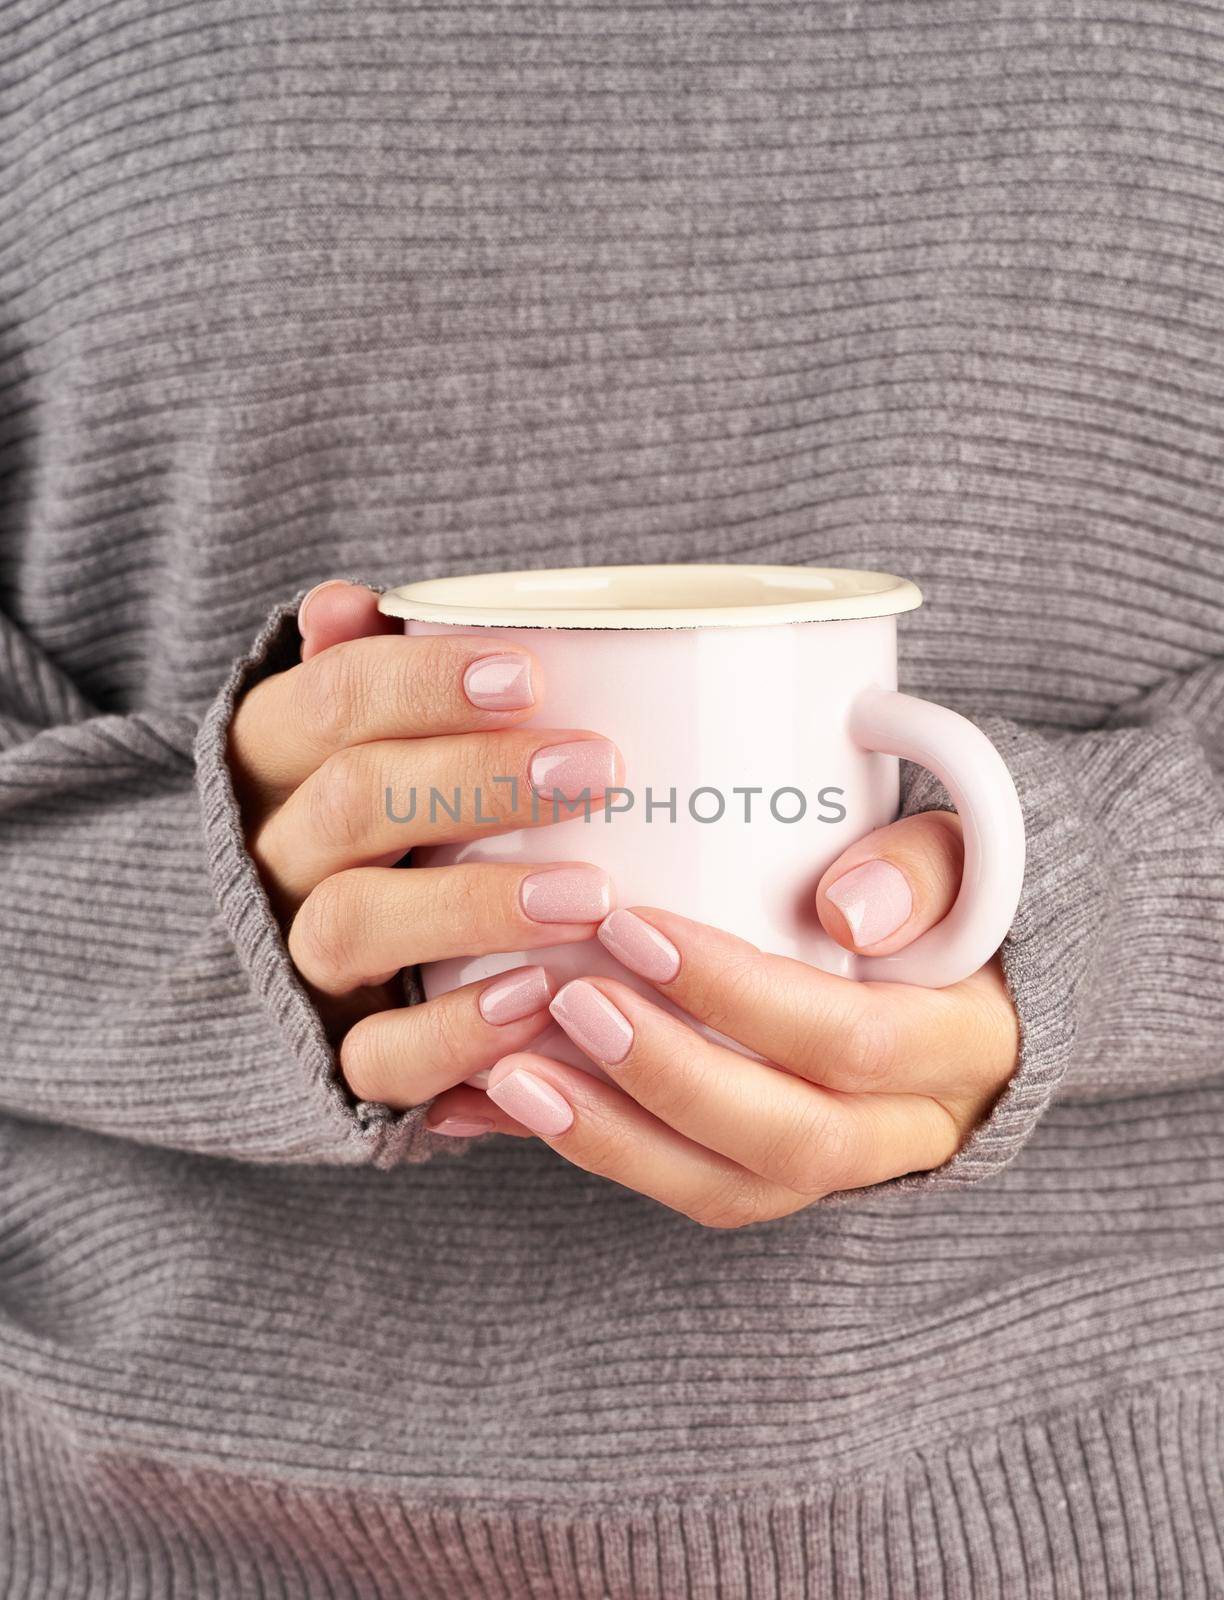 morning hot coffee at work in office on a cold autumn morning, hands holding a mug with a drink, gray sweater, pink manicure, close up, vertical